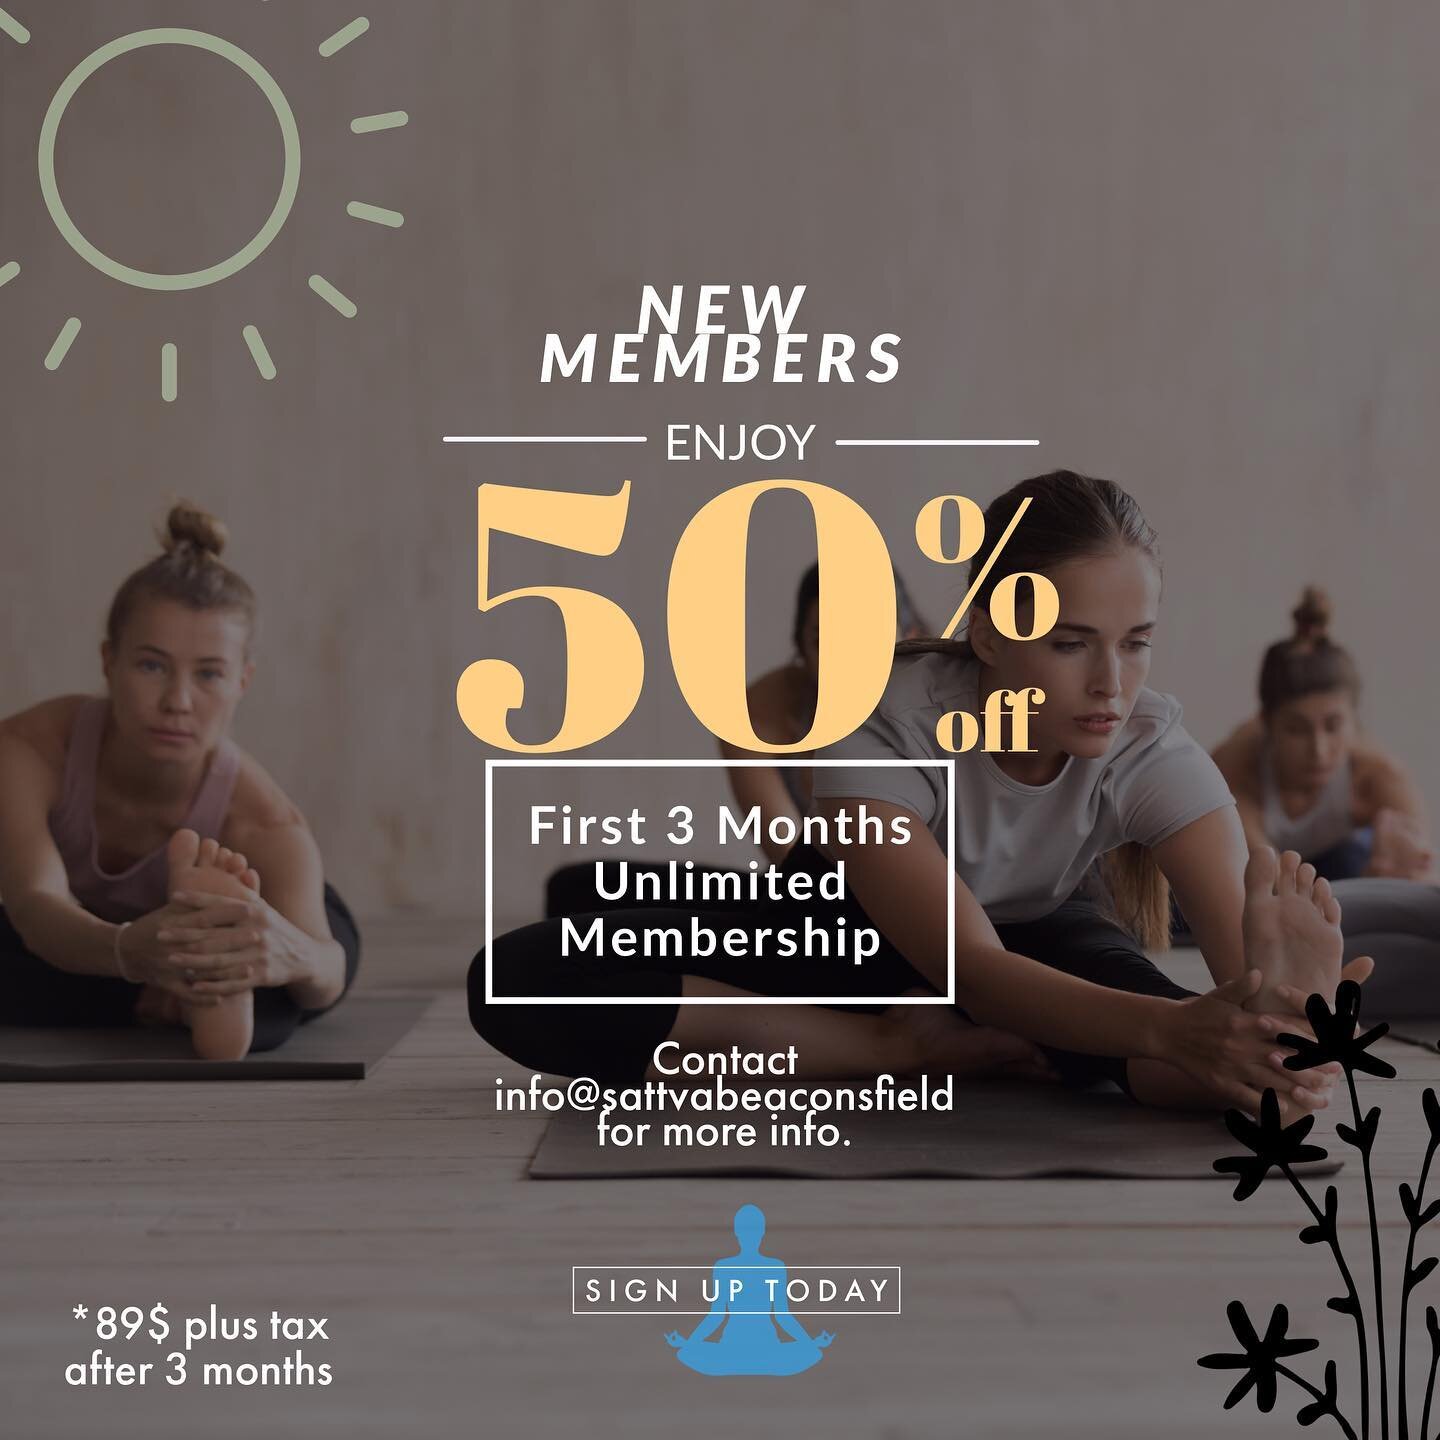 ATTENTION🎉 We are back in studio and more excited than ever to announce a discount for new members! If you&rsquo;re looking for a studio that is homey, cares about you and offers the yoga you&rsquo;re looking for&hellip; we have you covered! Tell yo